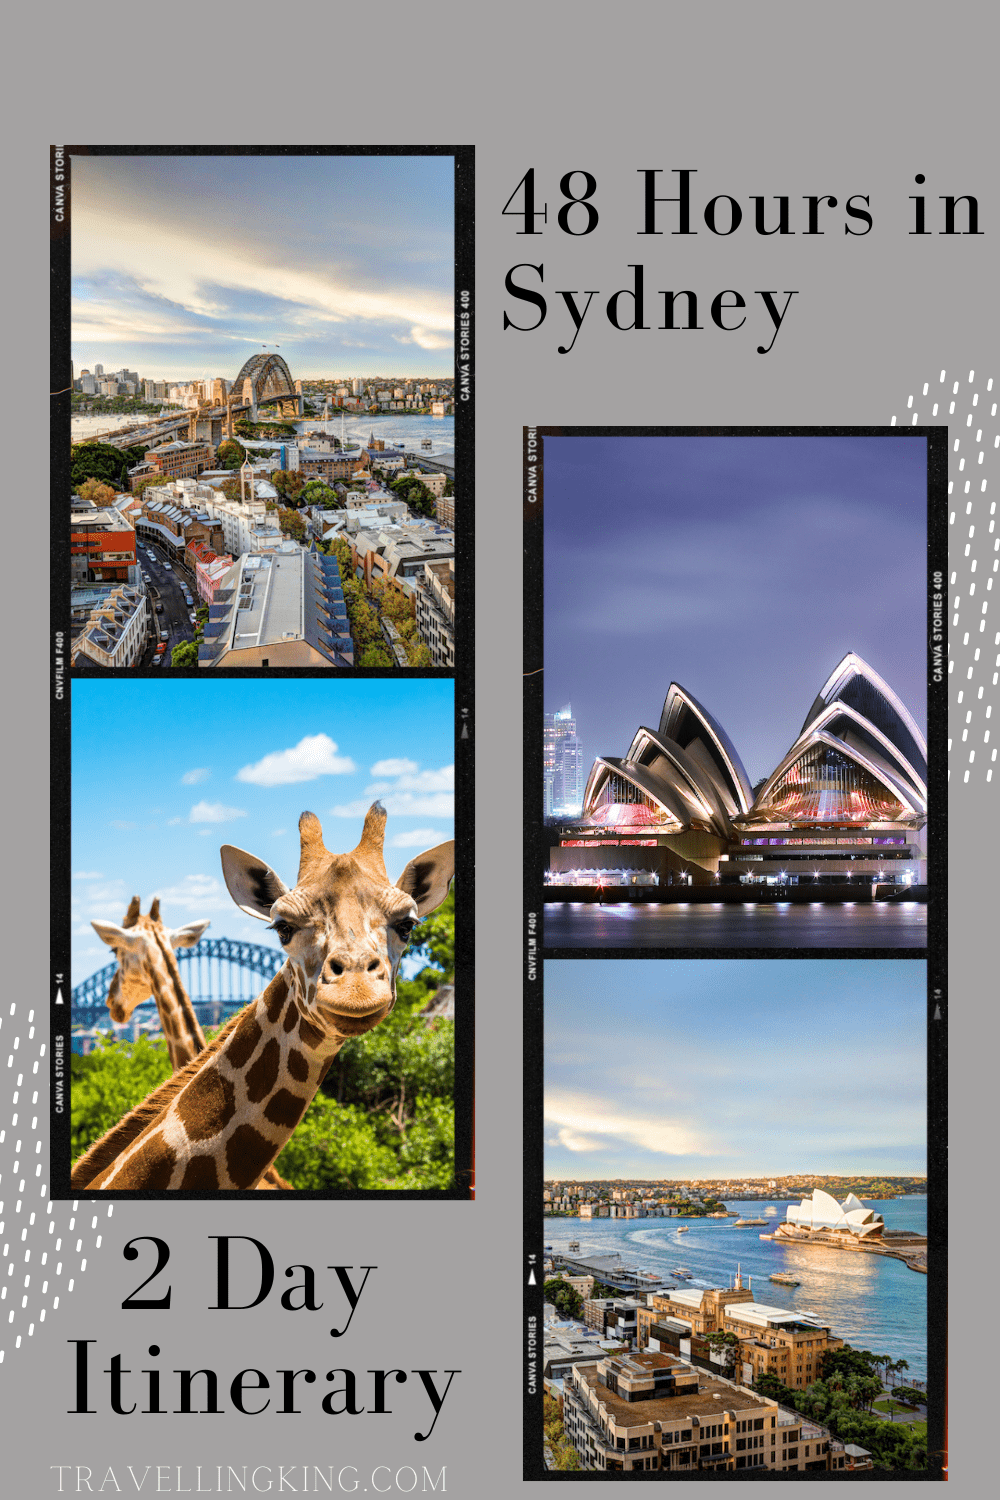 48 Hours in Sydney - A 2 Day Itinerary